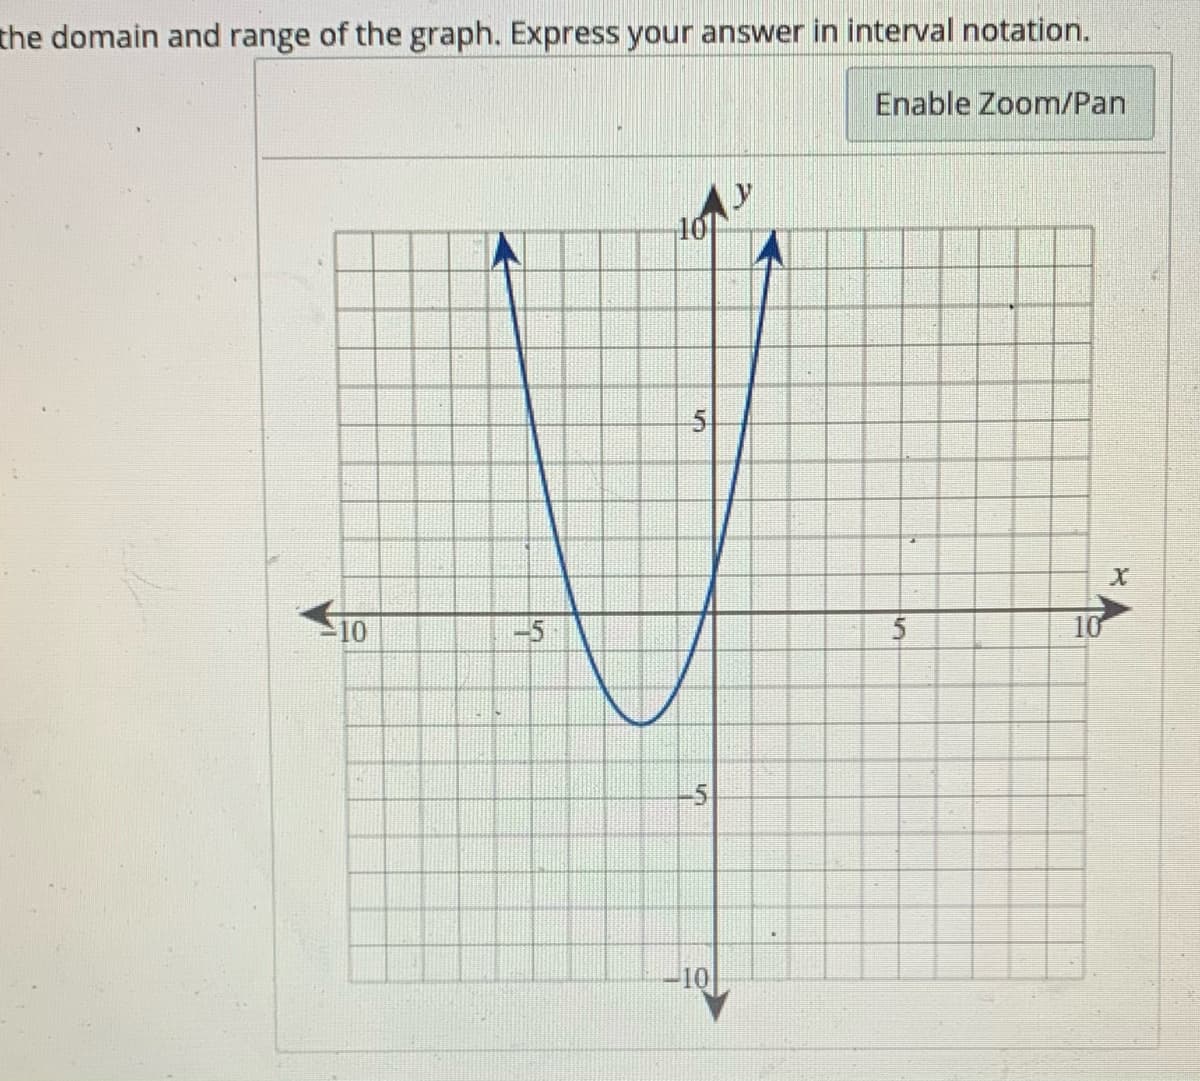 the domain and range of the graph. Express your answer in interval notation.
Enable Zoom/Pan
10
-5
10
-5
-10
